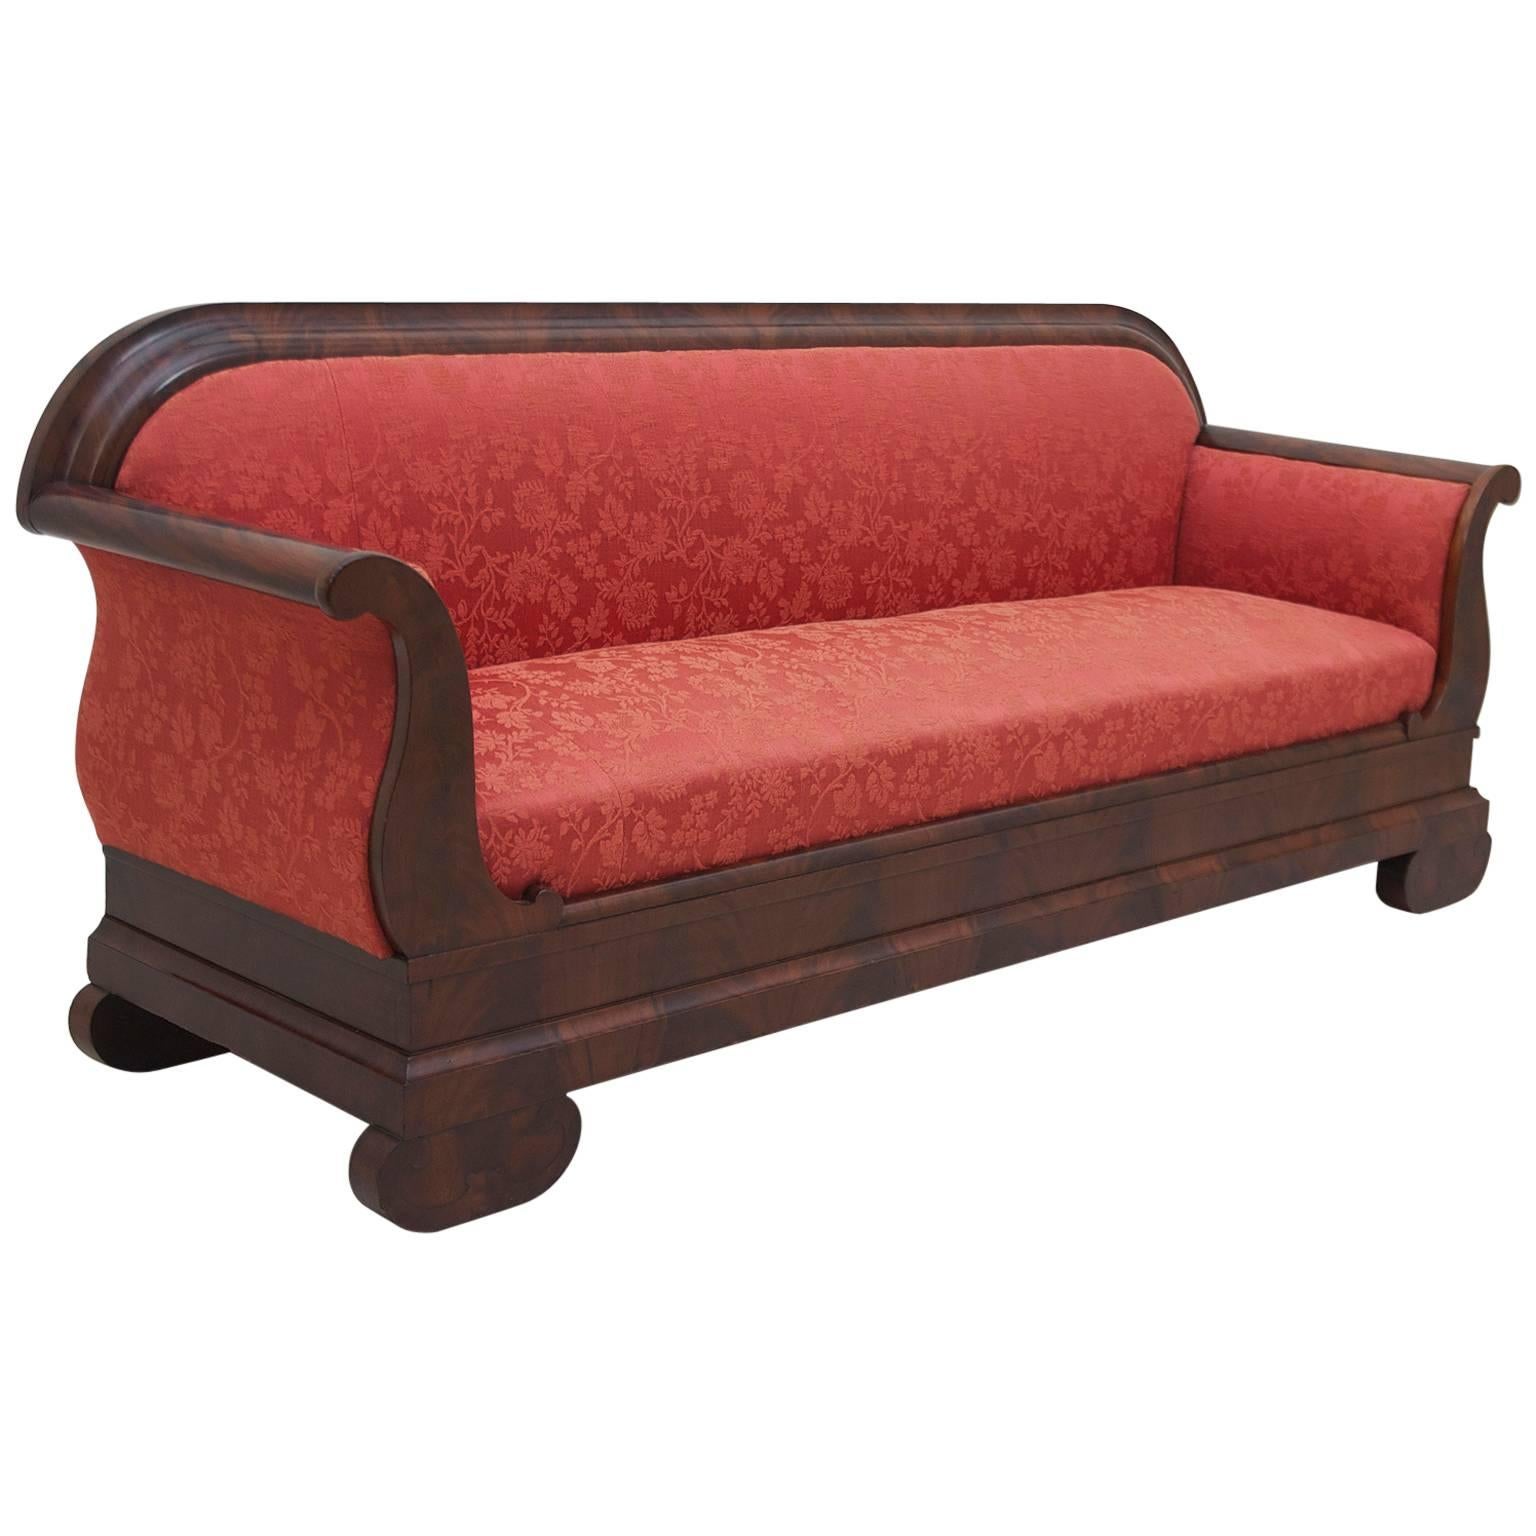 American Empire Sleigh Sofa in Mahogany Attributable to Meeks, circa 1835  For Sale at 1stDibs | american empire sofa, sleigh couch, empire couch